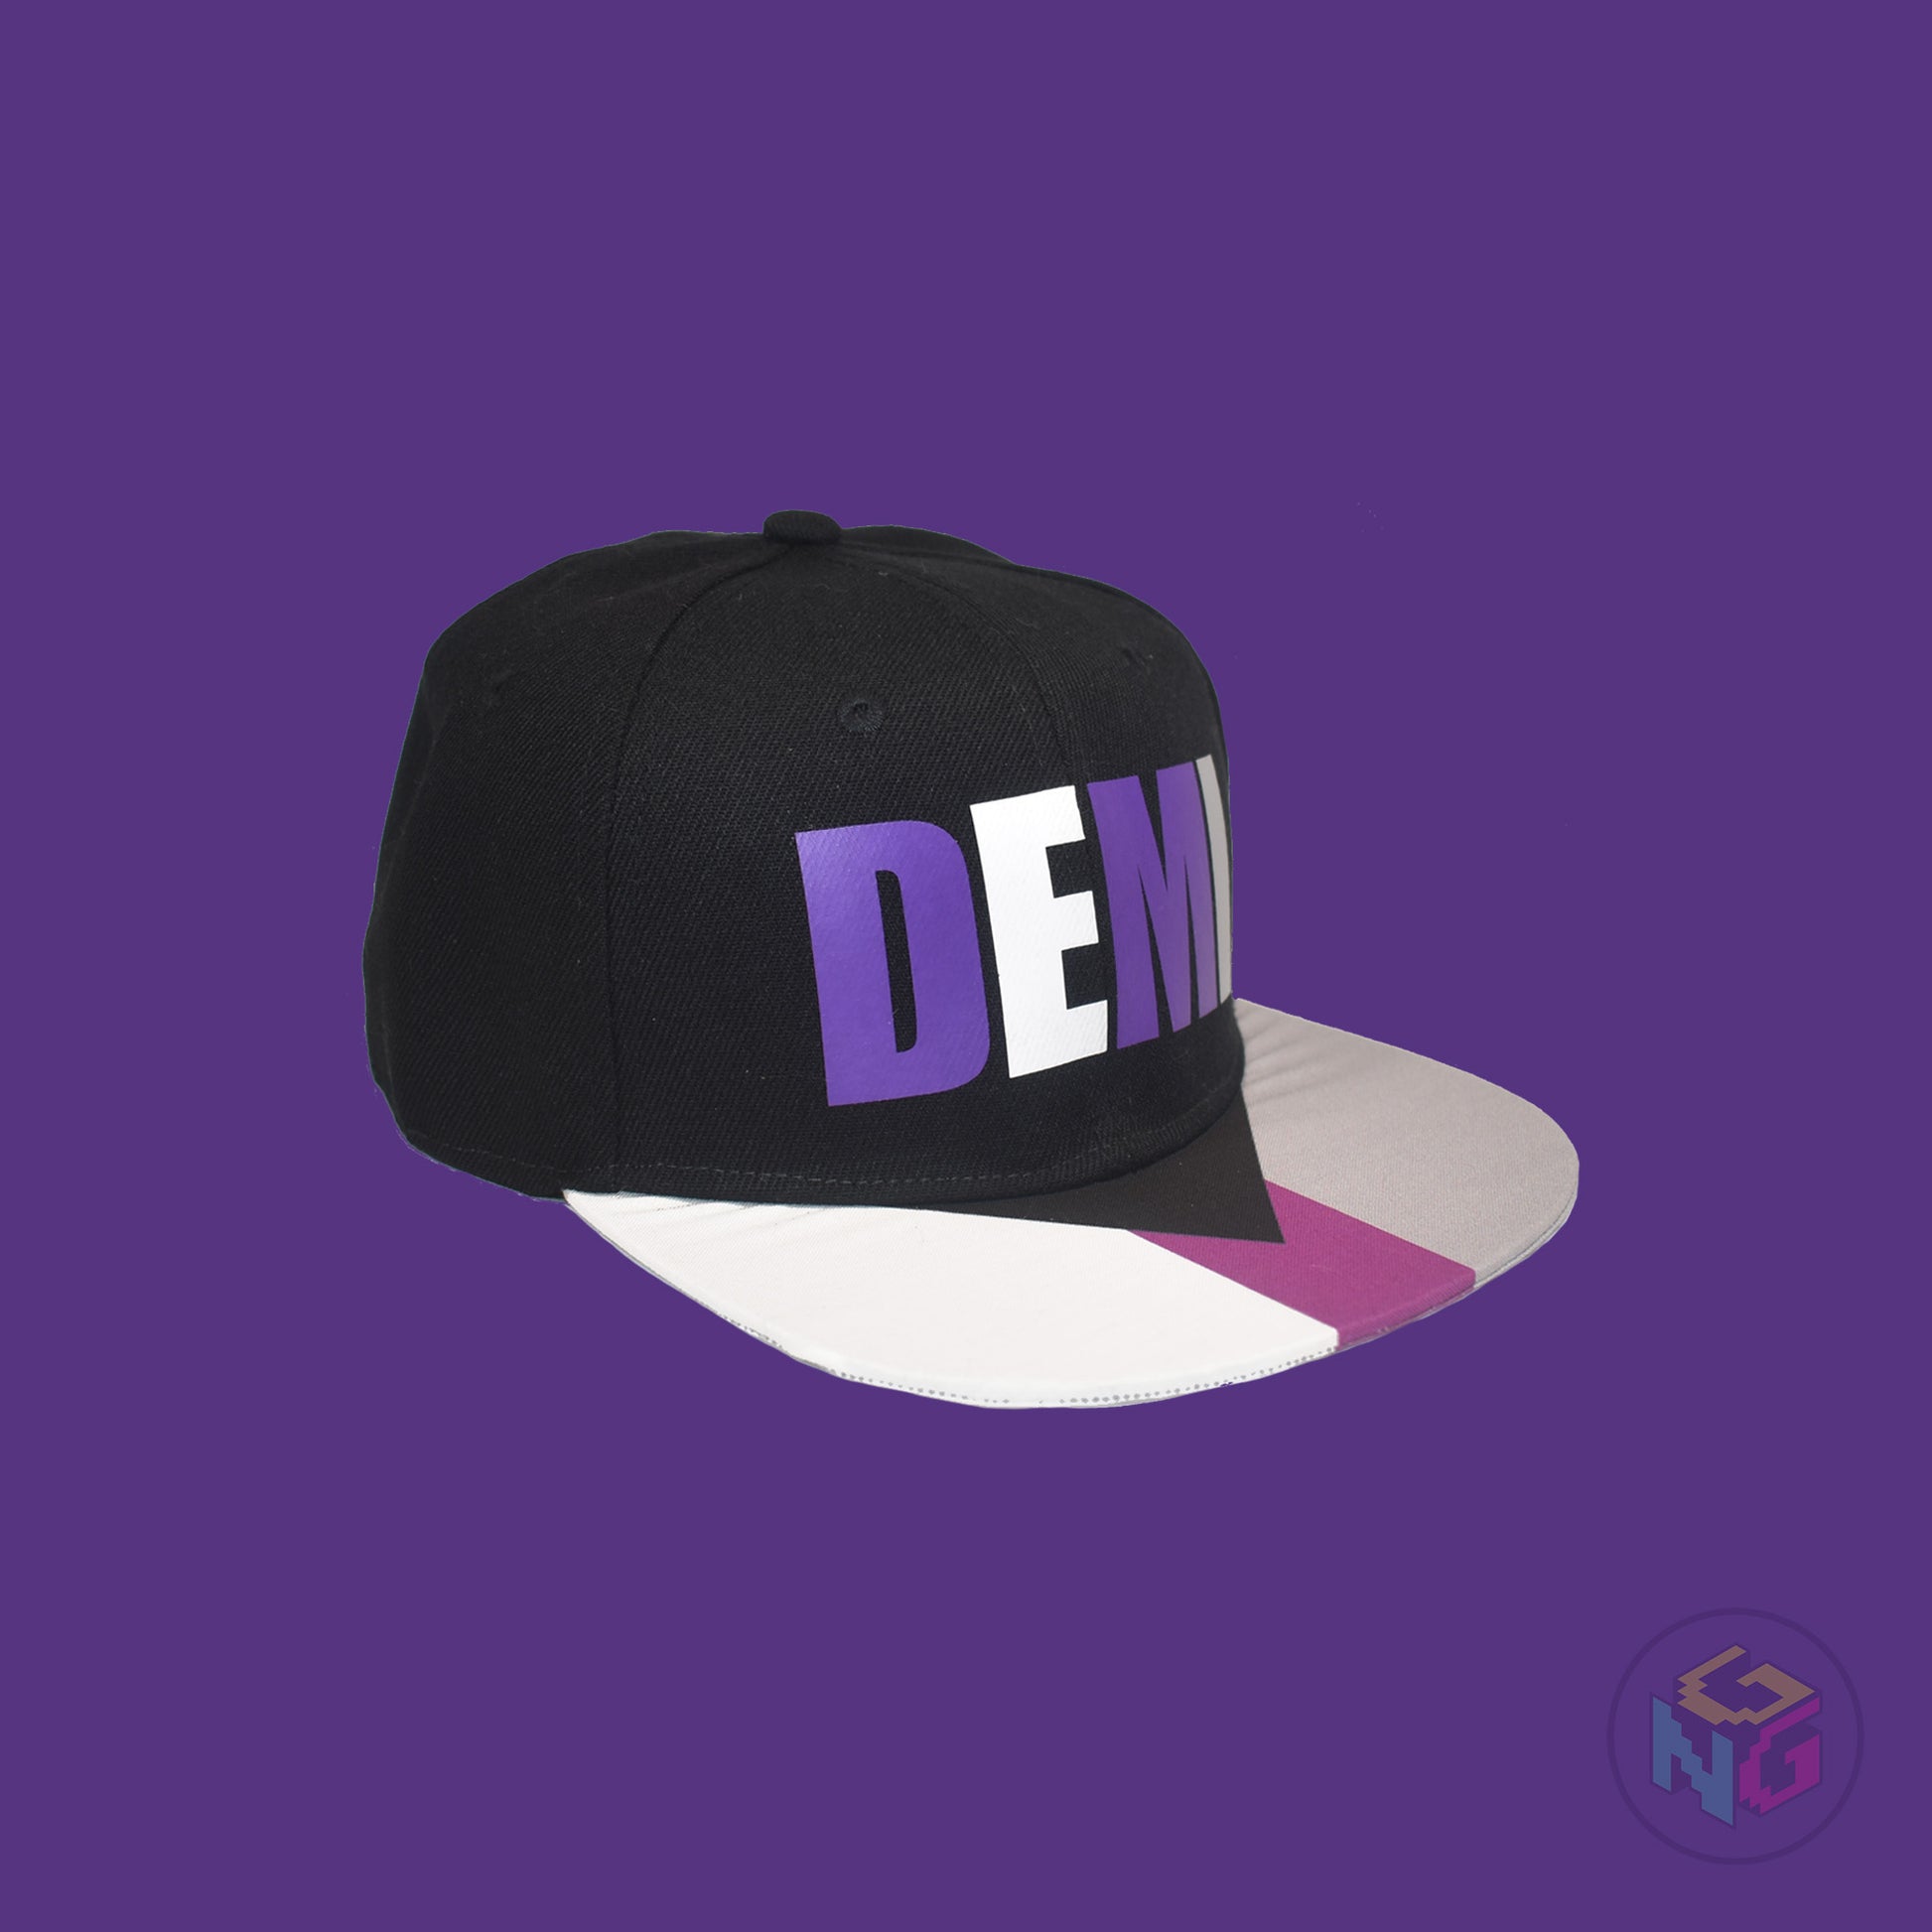 Black flat bill snapback hat. The brim has the demisexual pride flag on both sides and the front of the hat has the word “DEMI” in purple, white, and grey. Front right view